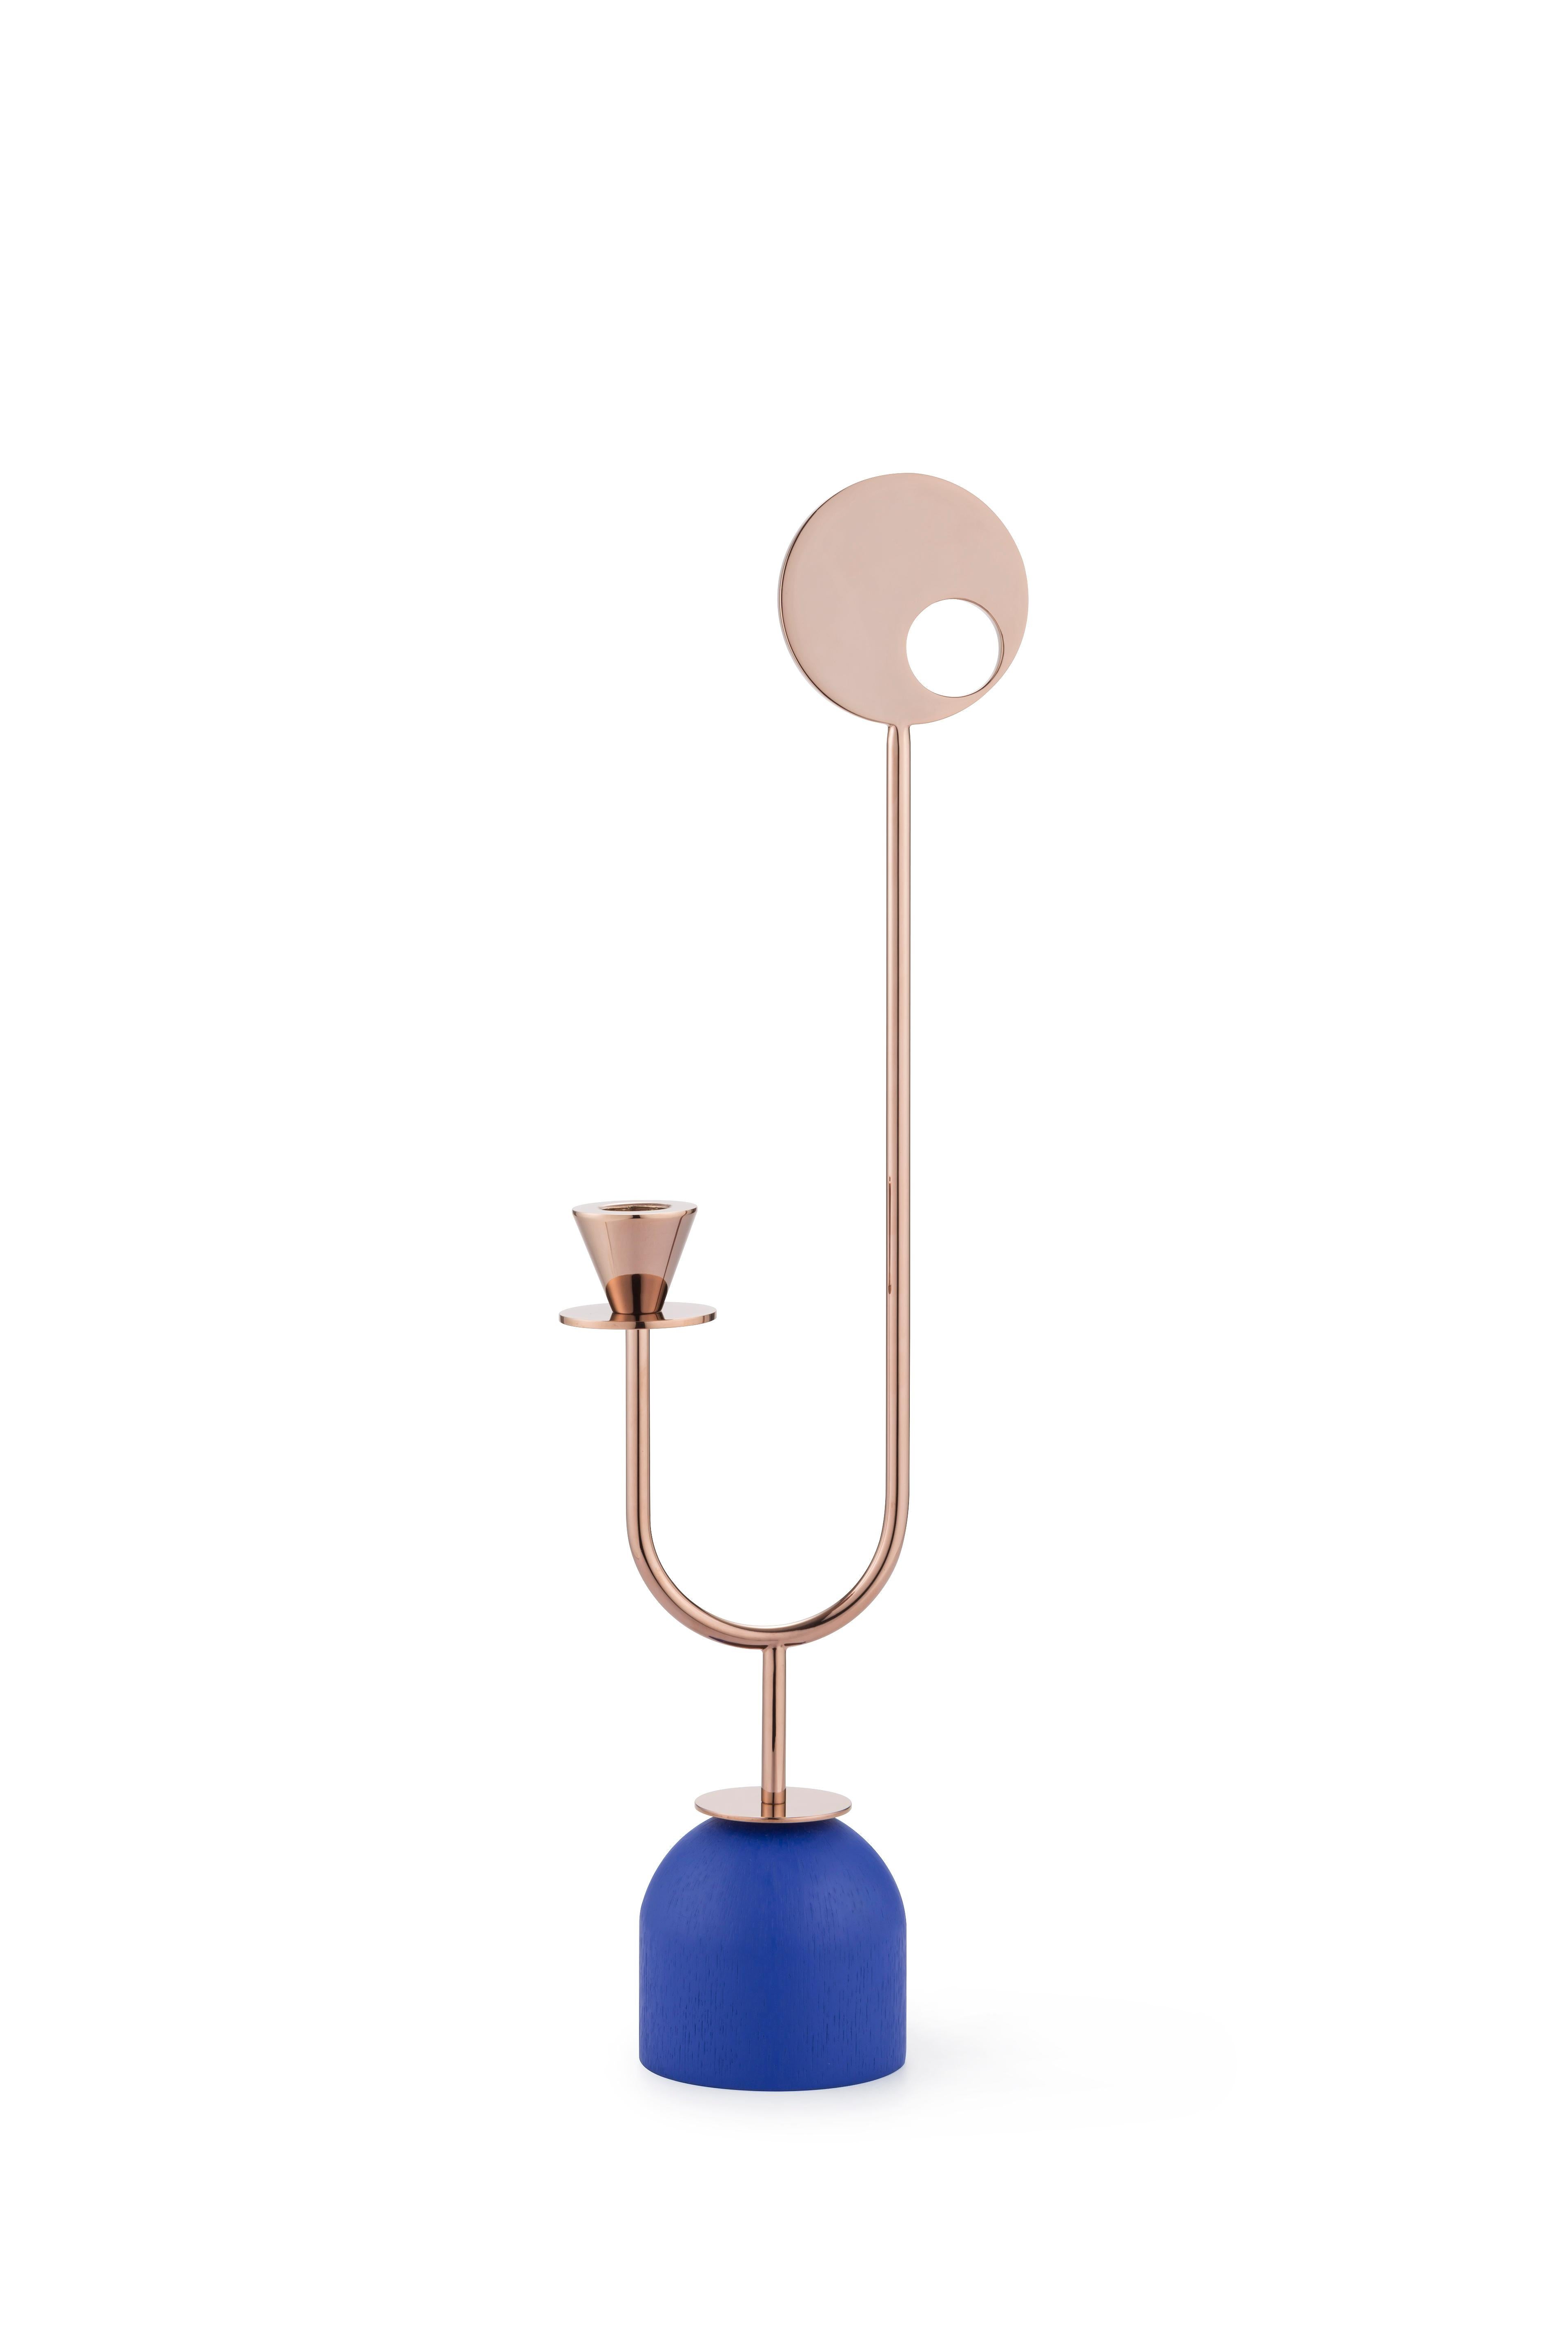 Homage to Memphis Movement - candleholder
Measures: D 8.5 x W 15 x H 50 cm
Plated metal coated with glossy pink copper finish
Base in ash veneer painted in matte dusty pink, yellow or blue

Paris-Memphis capsule collection draws its inspiration